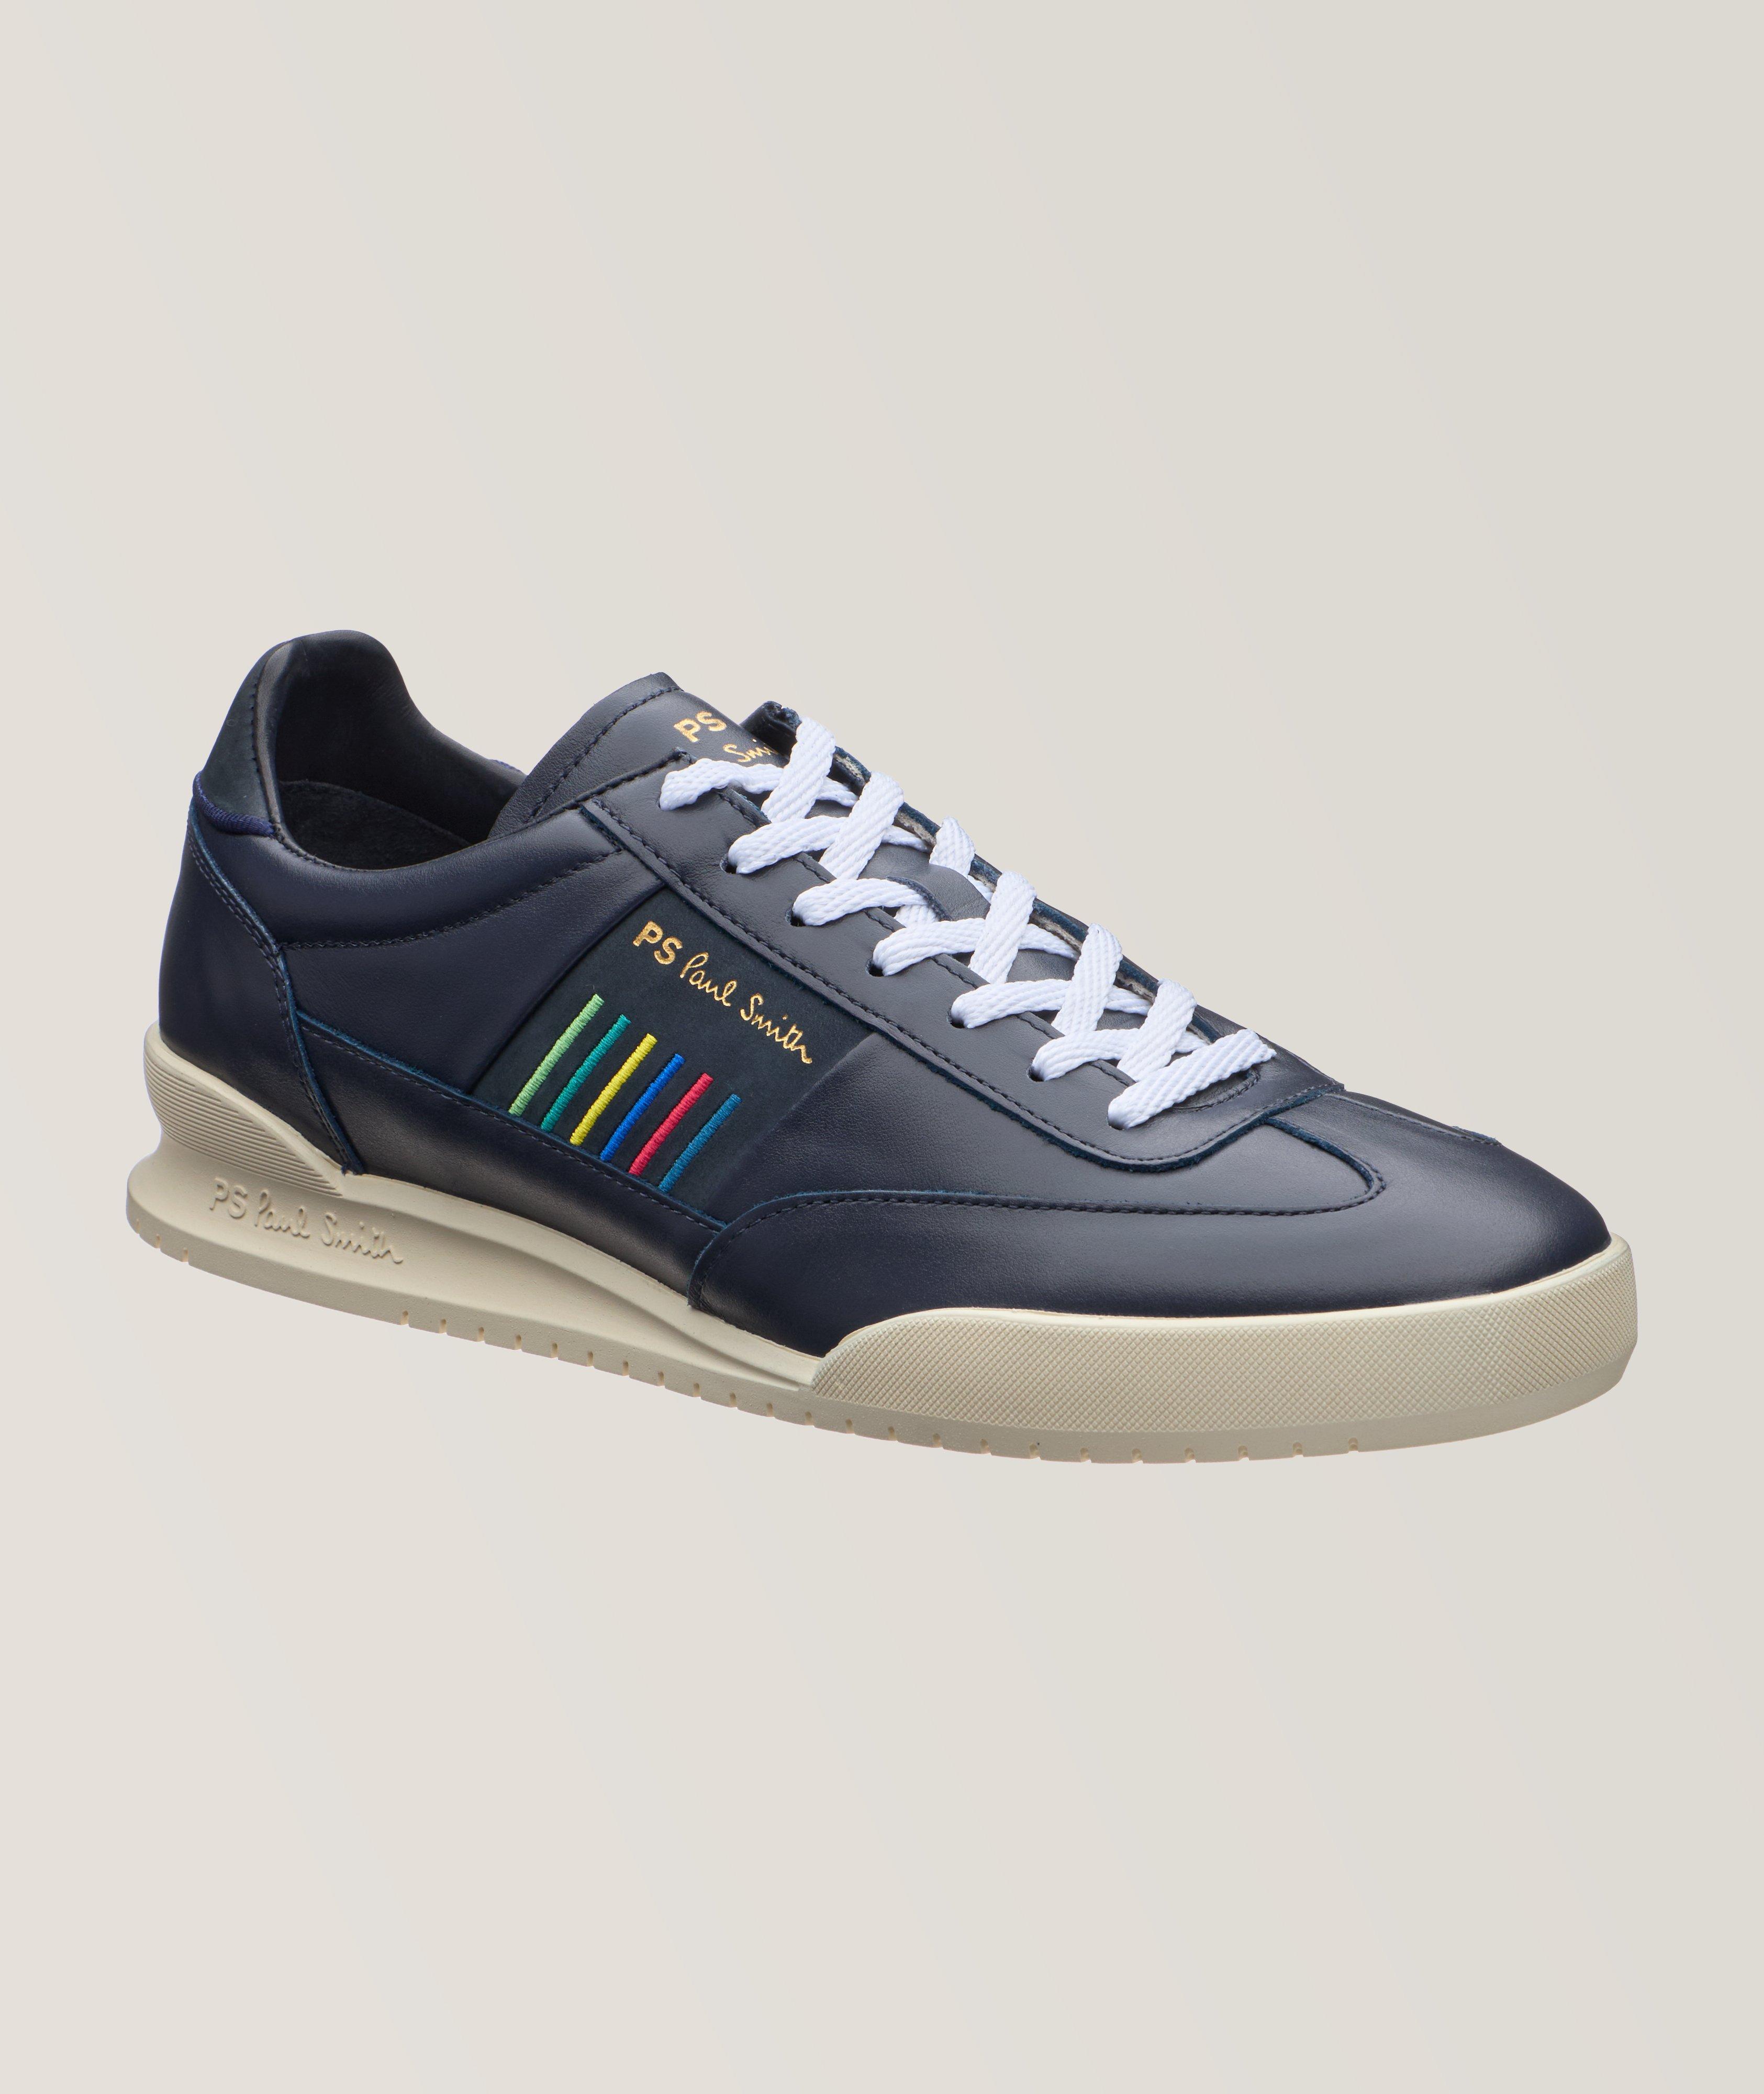 Dover Leather Sneakers image 0